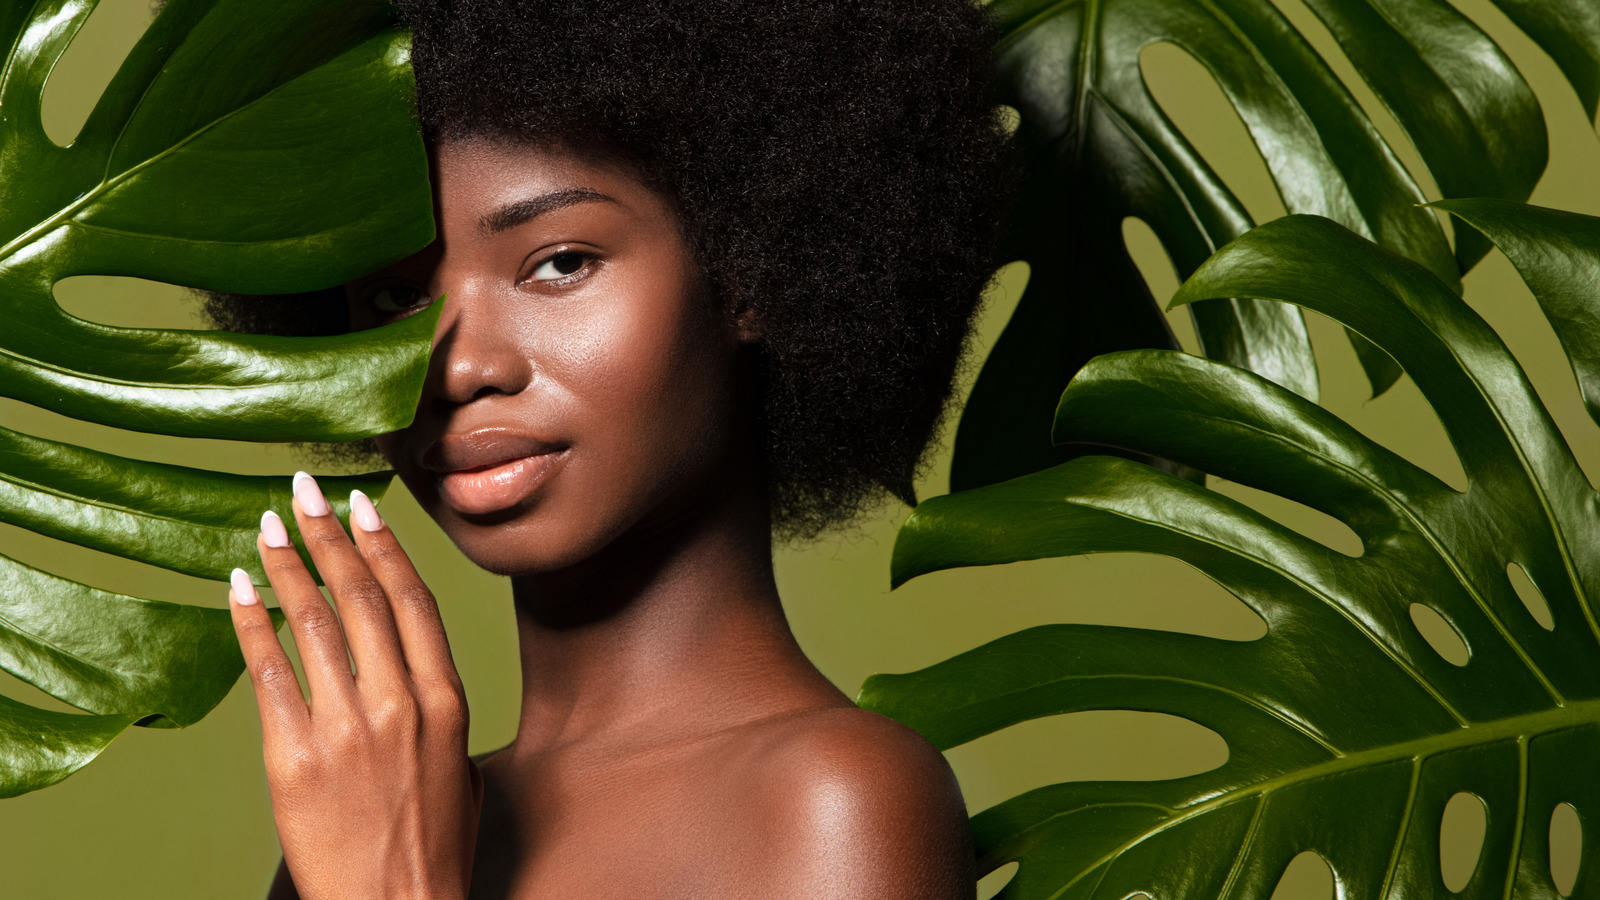 How Skincare Can Help You Connect You With Nature, According To An Expert